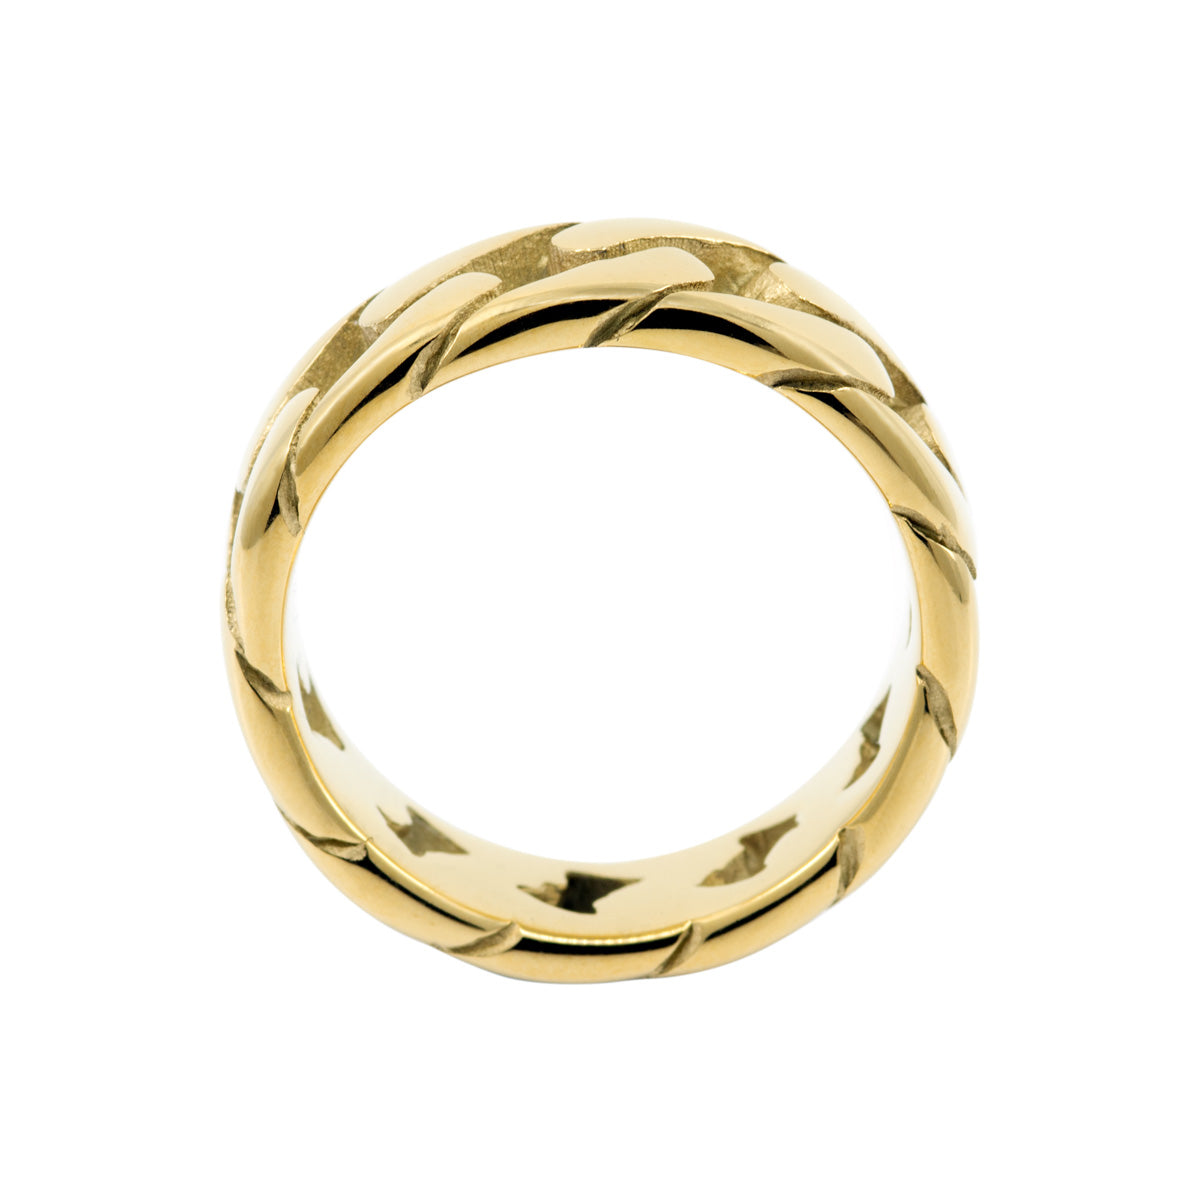 Miami Cuban Link Chain Ring for Men 14K Yellow Gold 5.5mm by Luxurman 000840